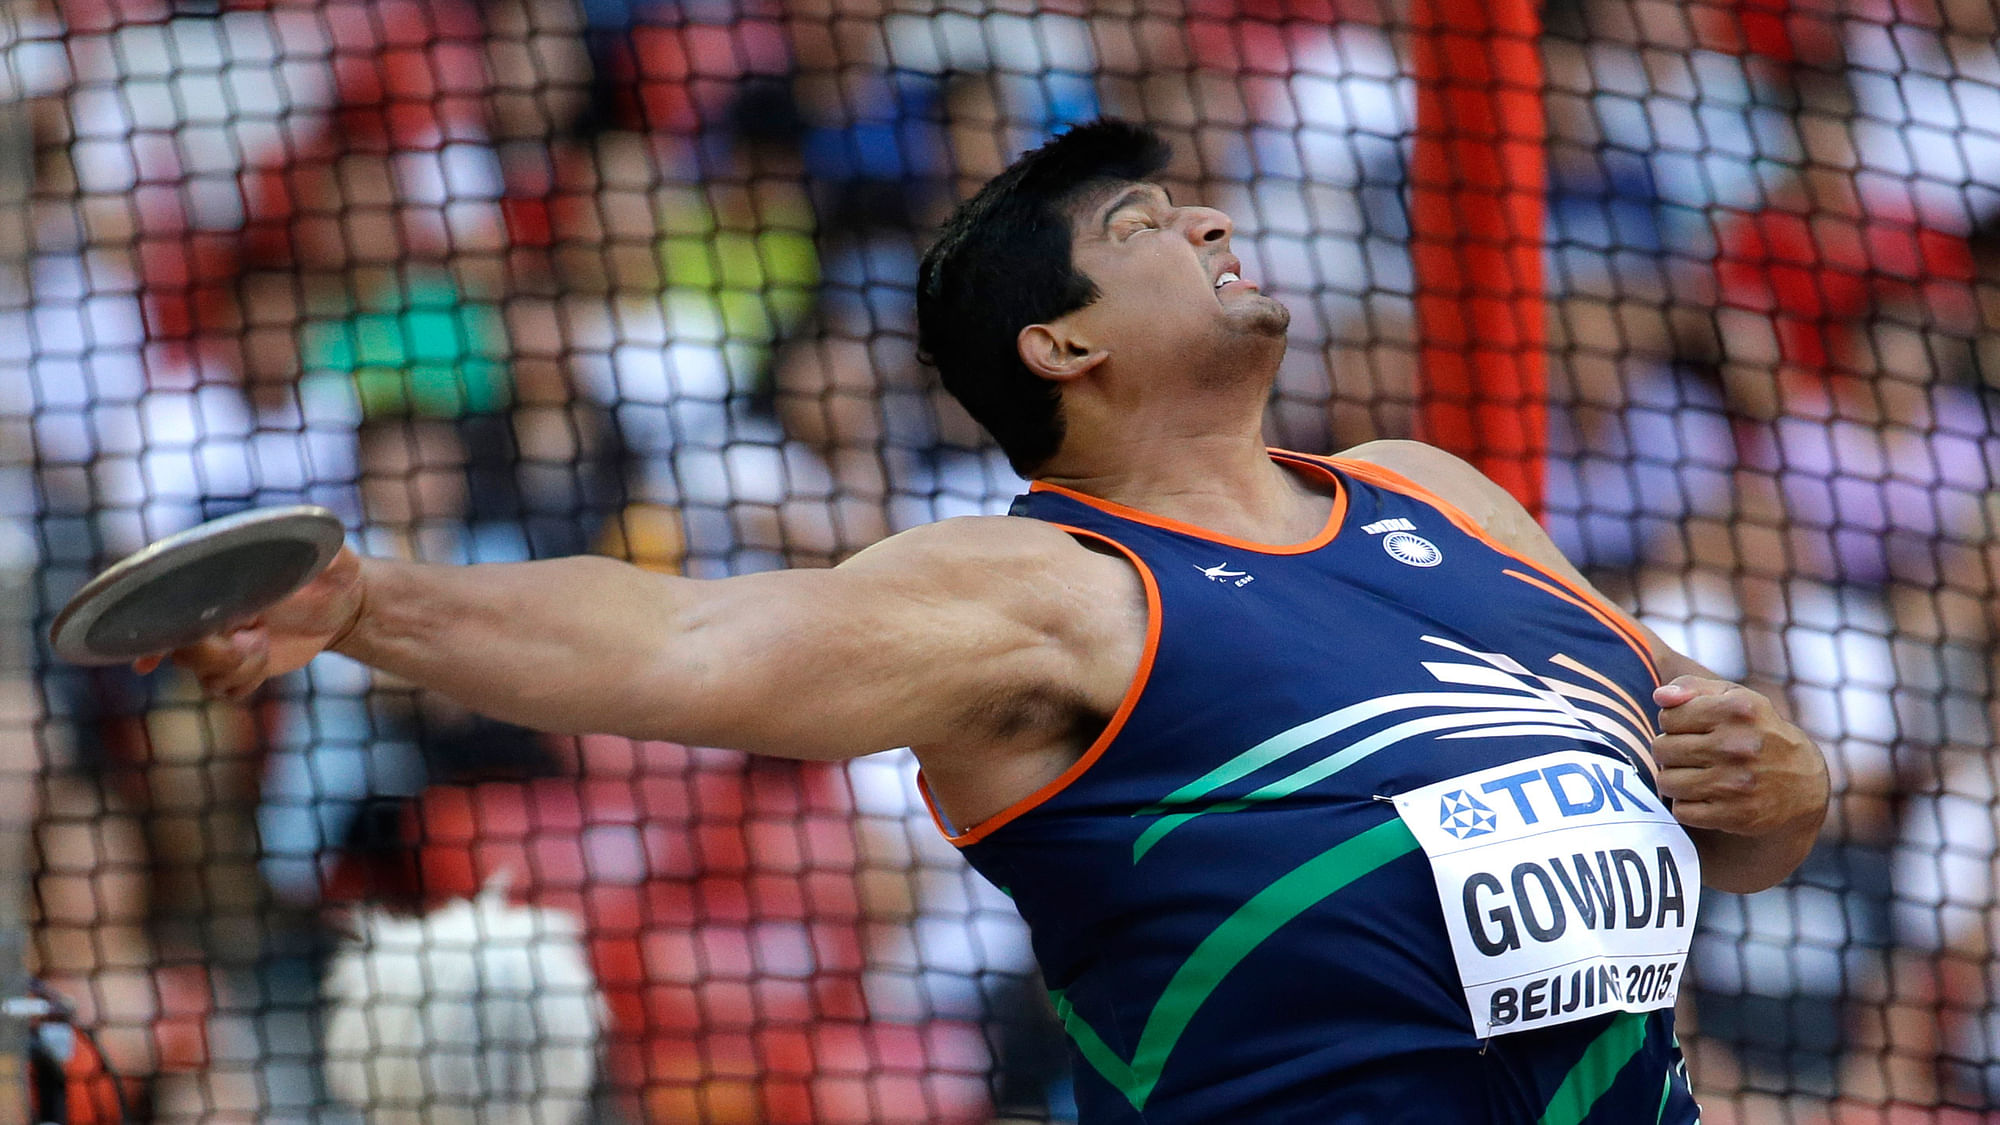 India’s Vikas Gowda competes in men’s discus throw qualification at the World Athletics Championships. (Photo: AP)